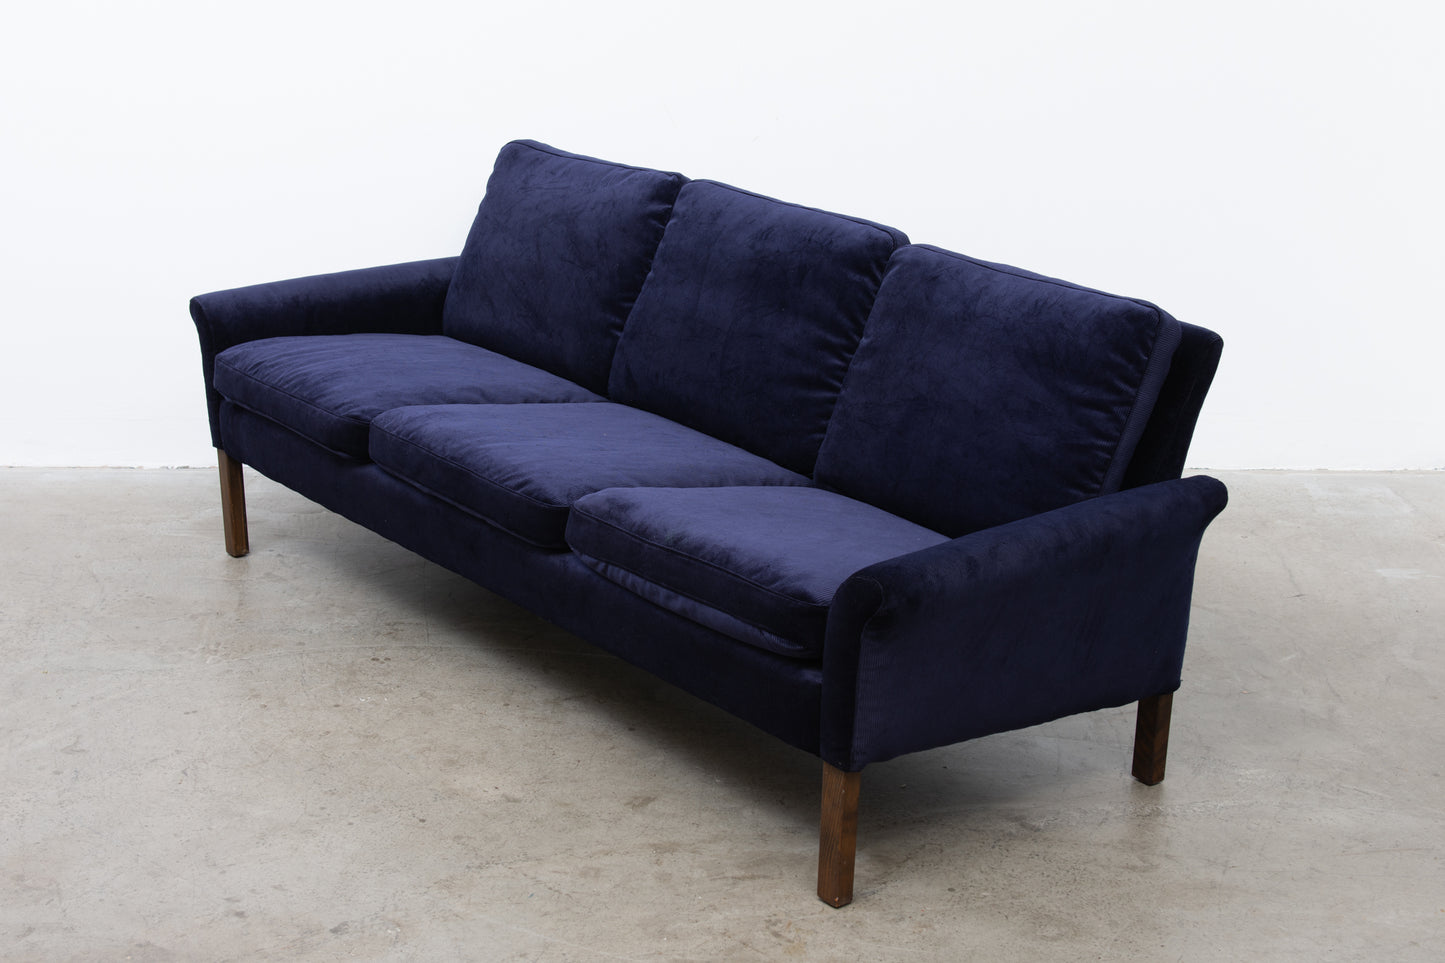 Newly upholstered: 1960s three seater in navy corduroy